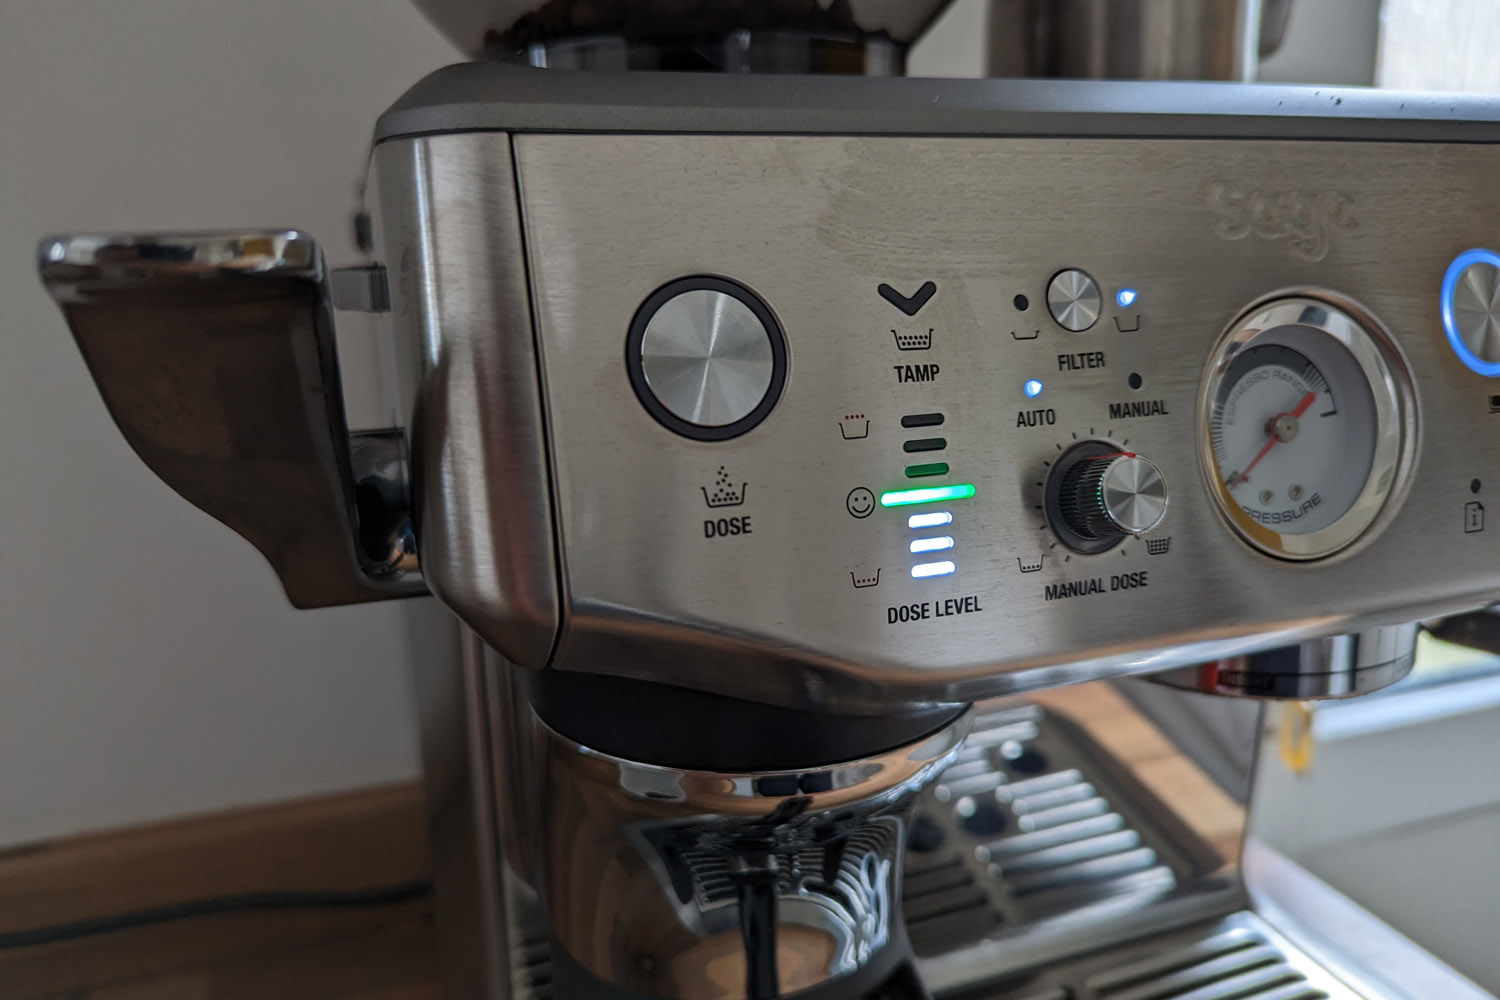 Sage's Barista Express Impress is the holy grail of homemade coffee